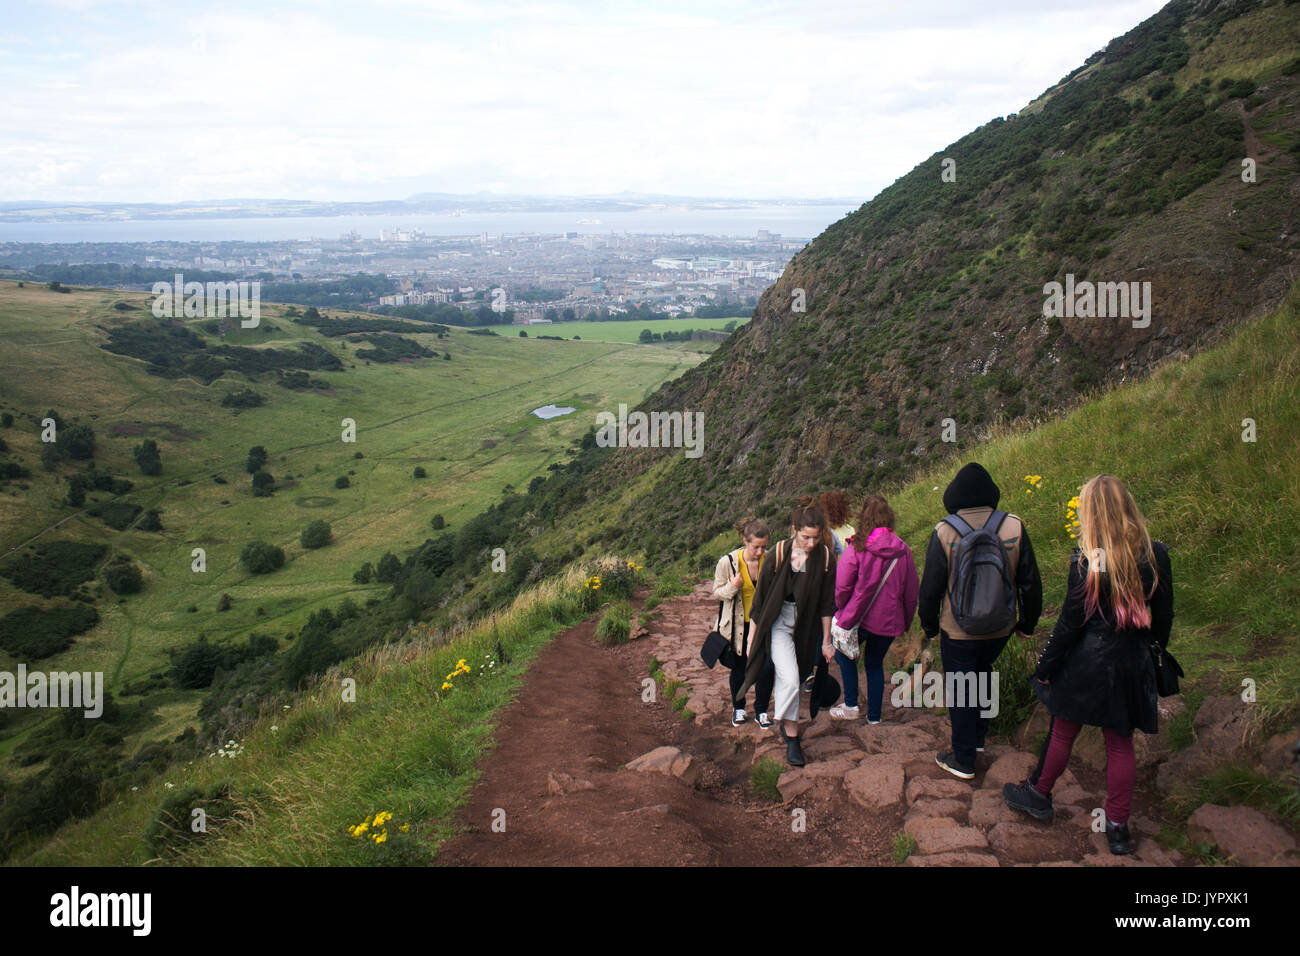 The peak of King Arthur's Seat is a popular destination for both locals and tourists. The peak and surrounding rocky hills are remnants of vulcanic ro Stock Photo